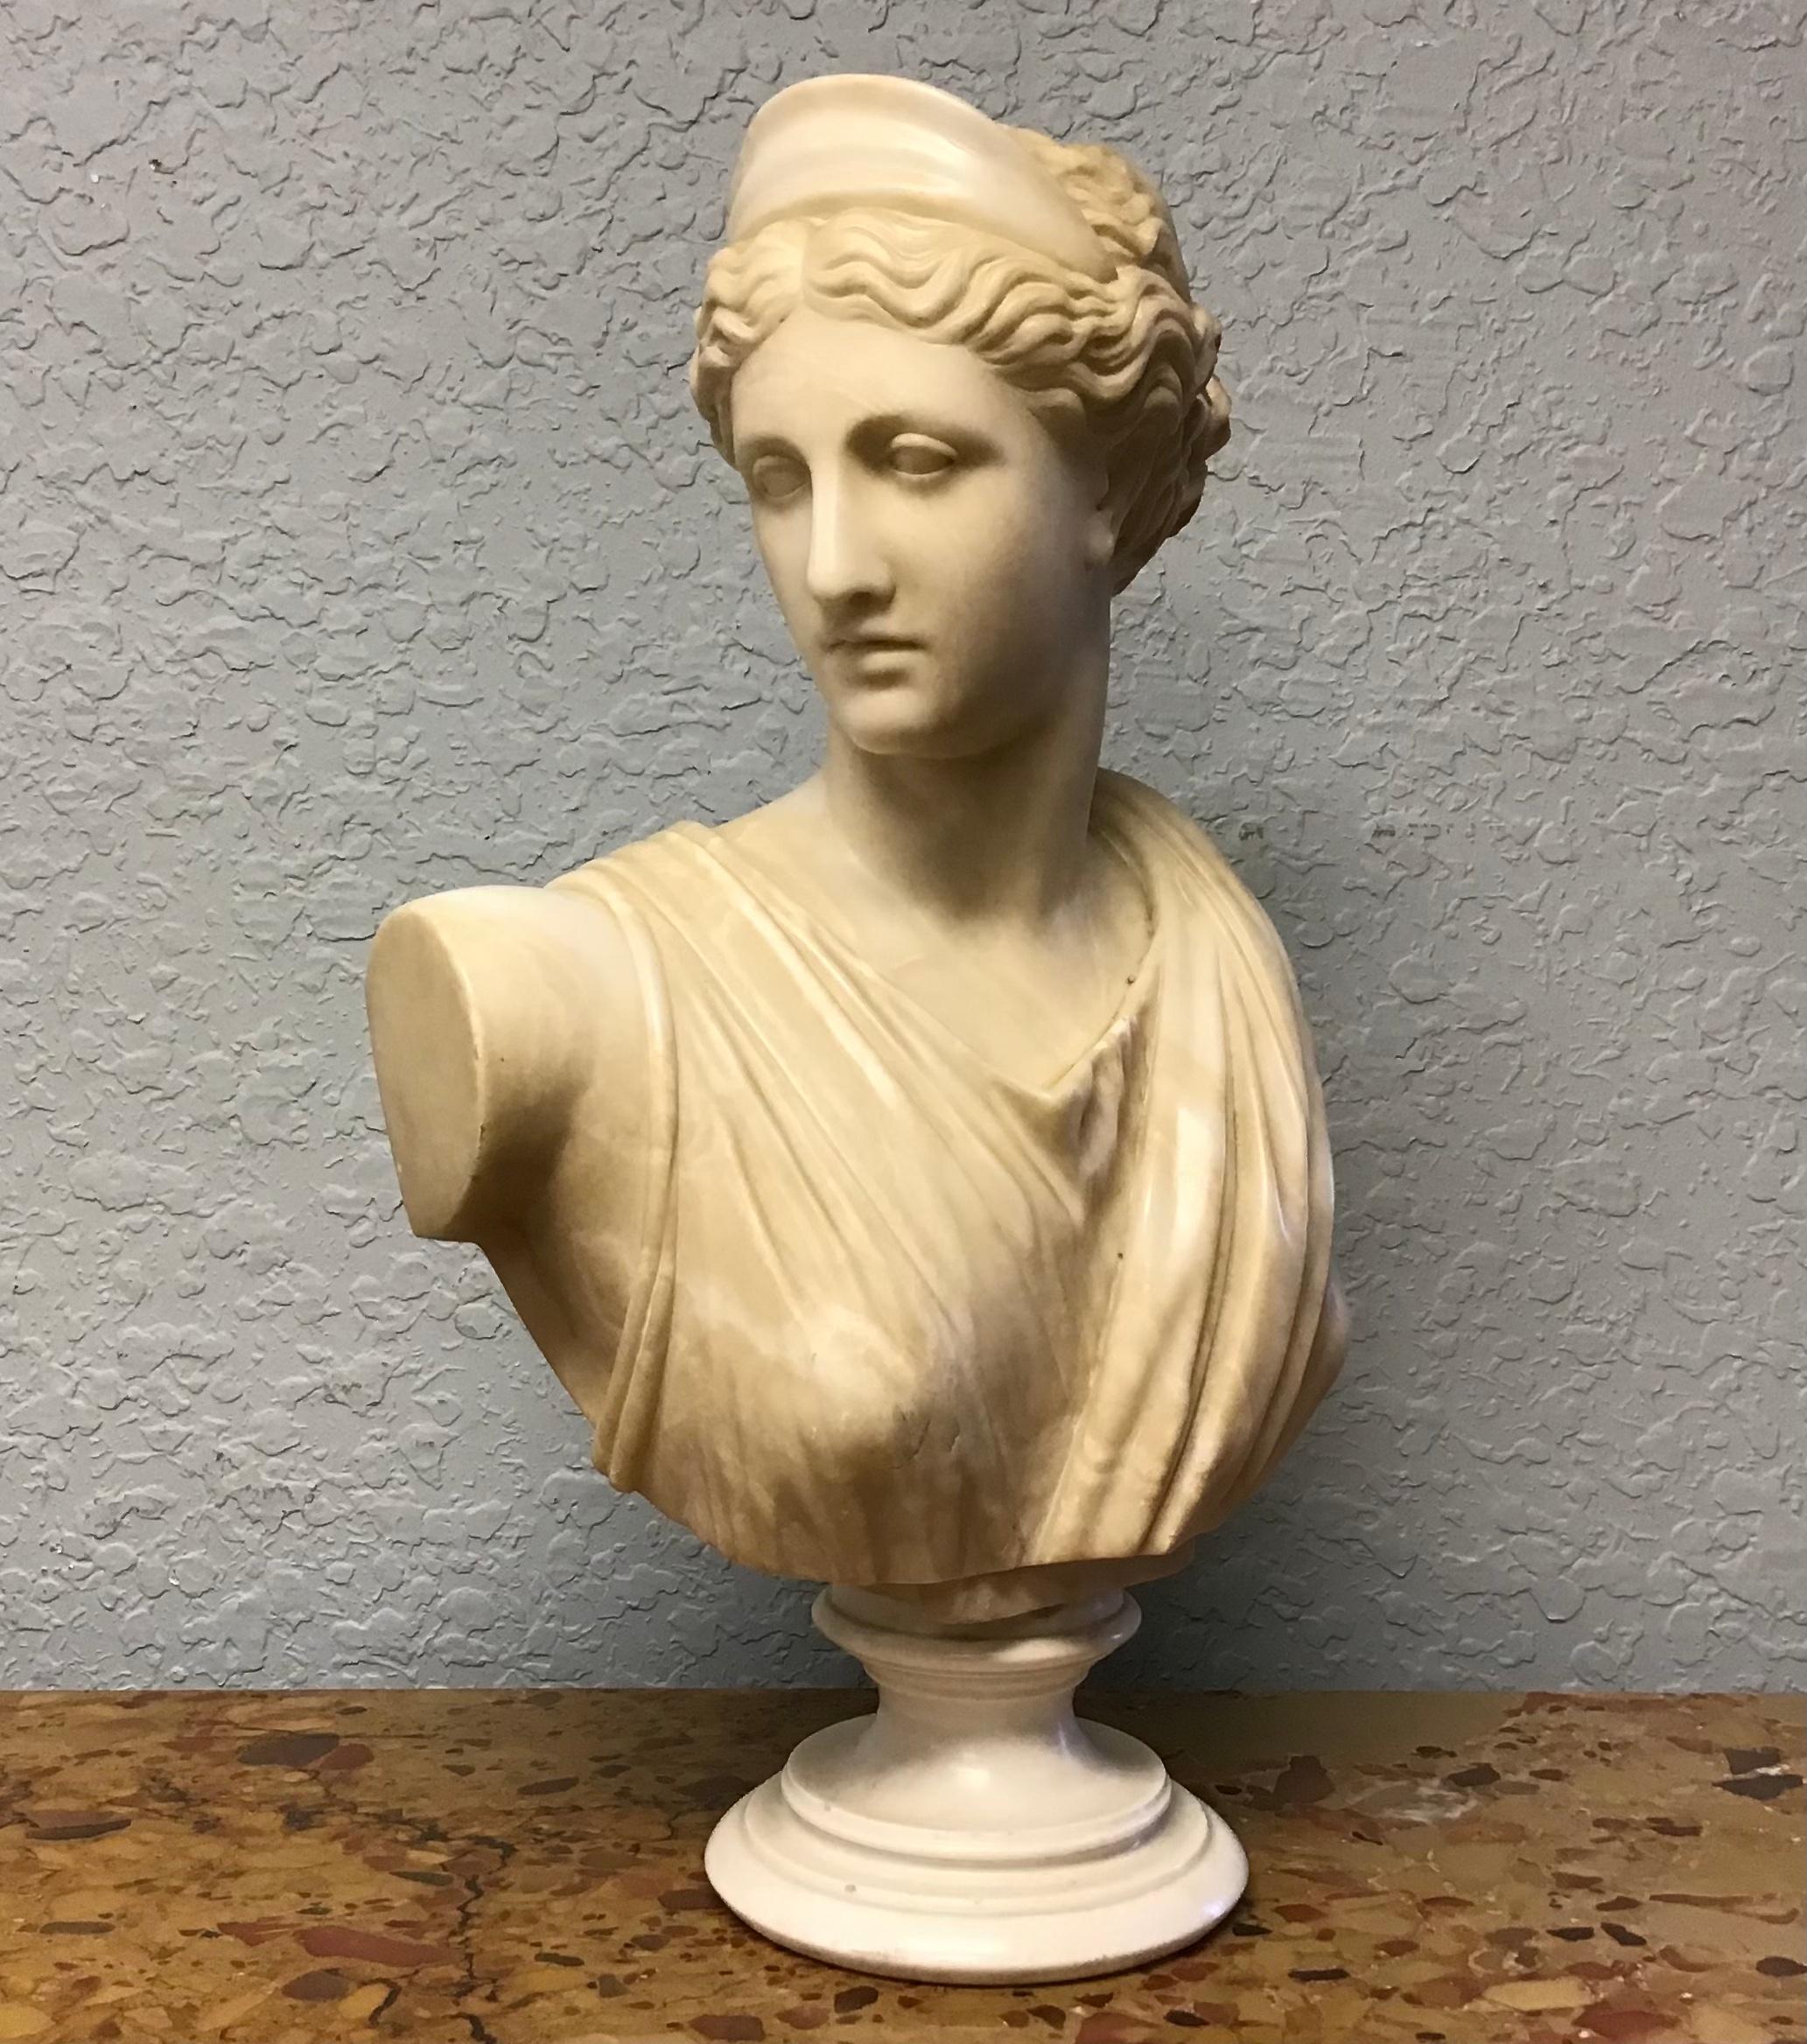 This finely sculpted marble bust of the goddess, Diana, after the original by Leochares, is unsigned and dates from the early 20th century. In very good condition. Measures: 19.2 x 1

This is an exceptional work after Diana the Huntress, the